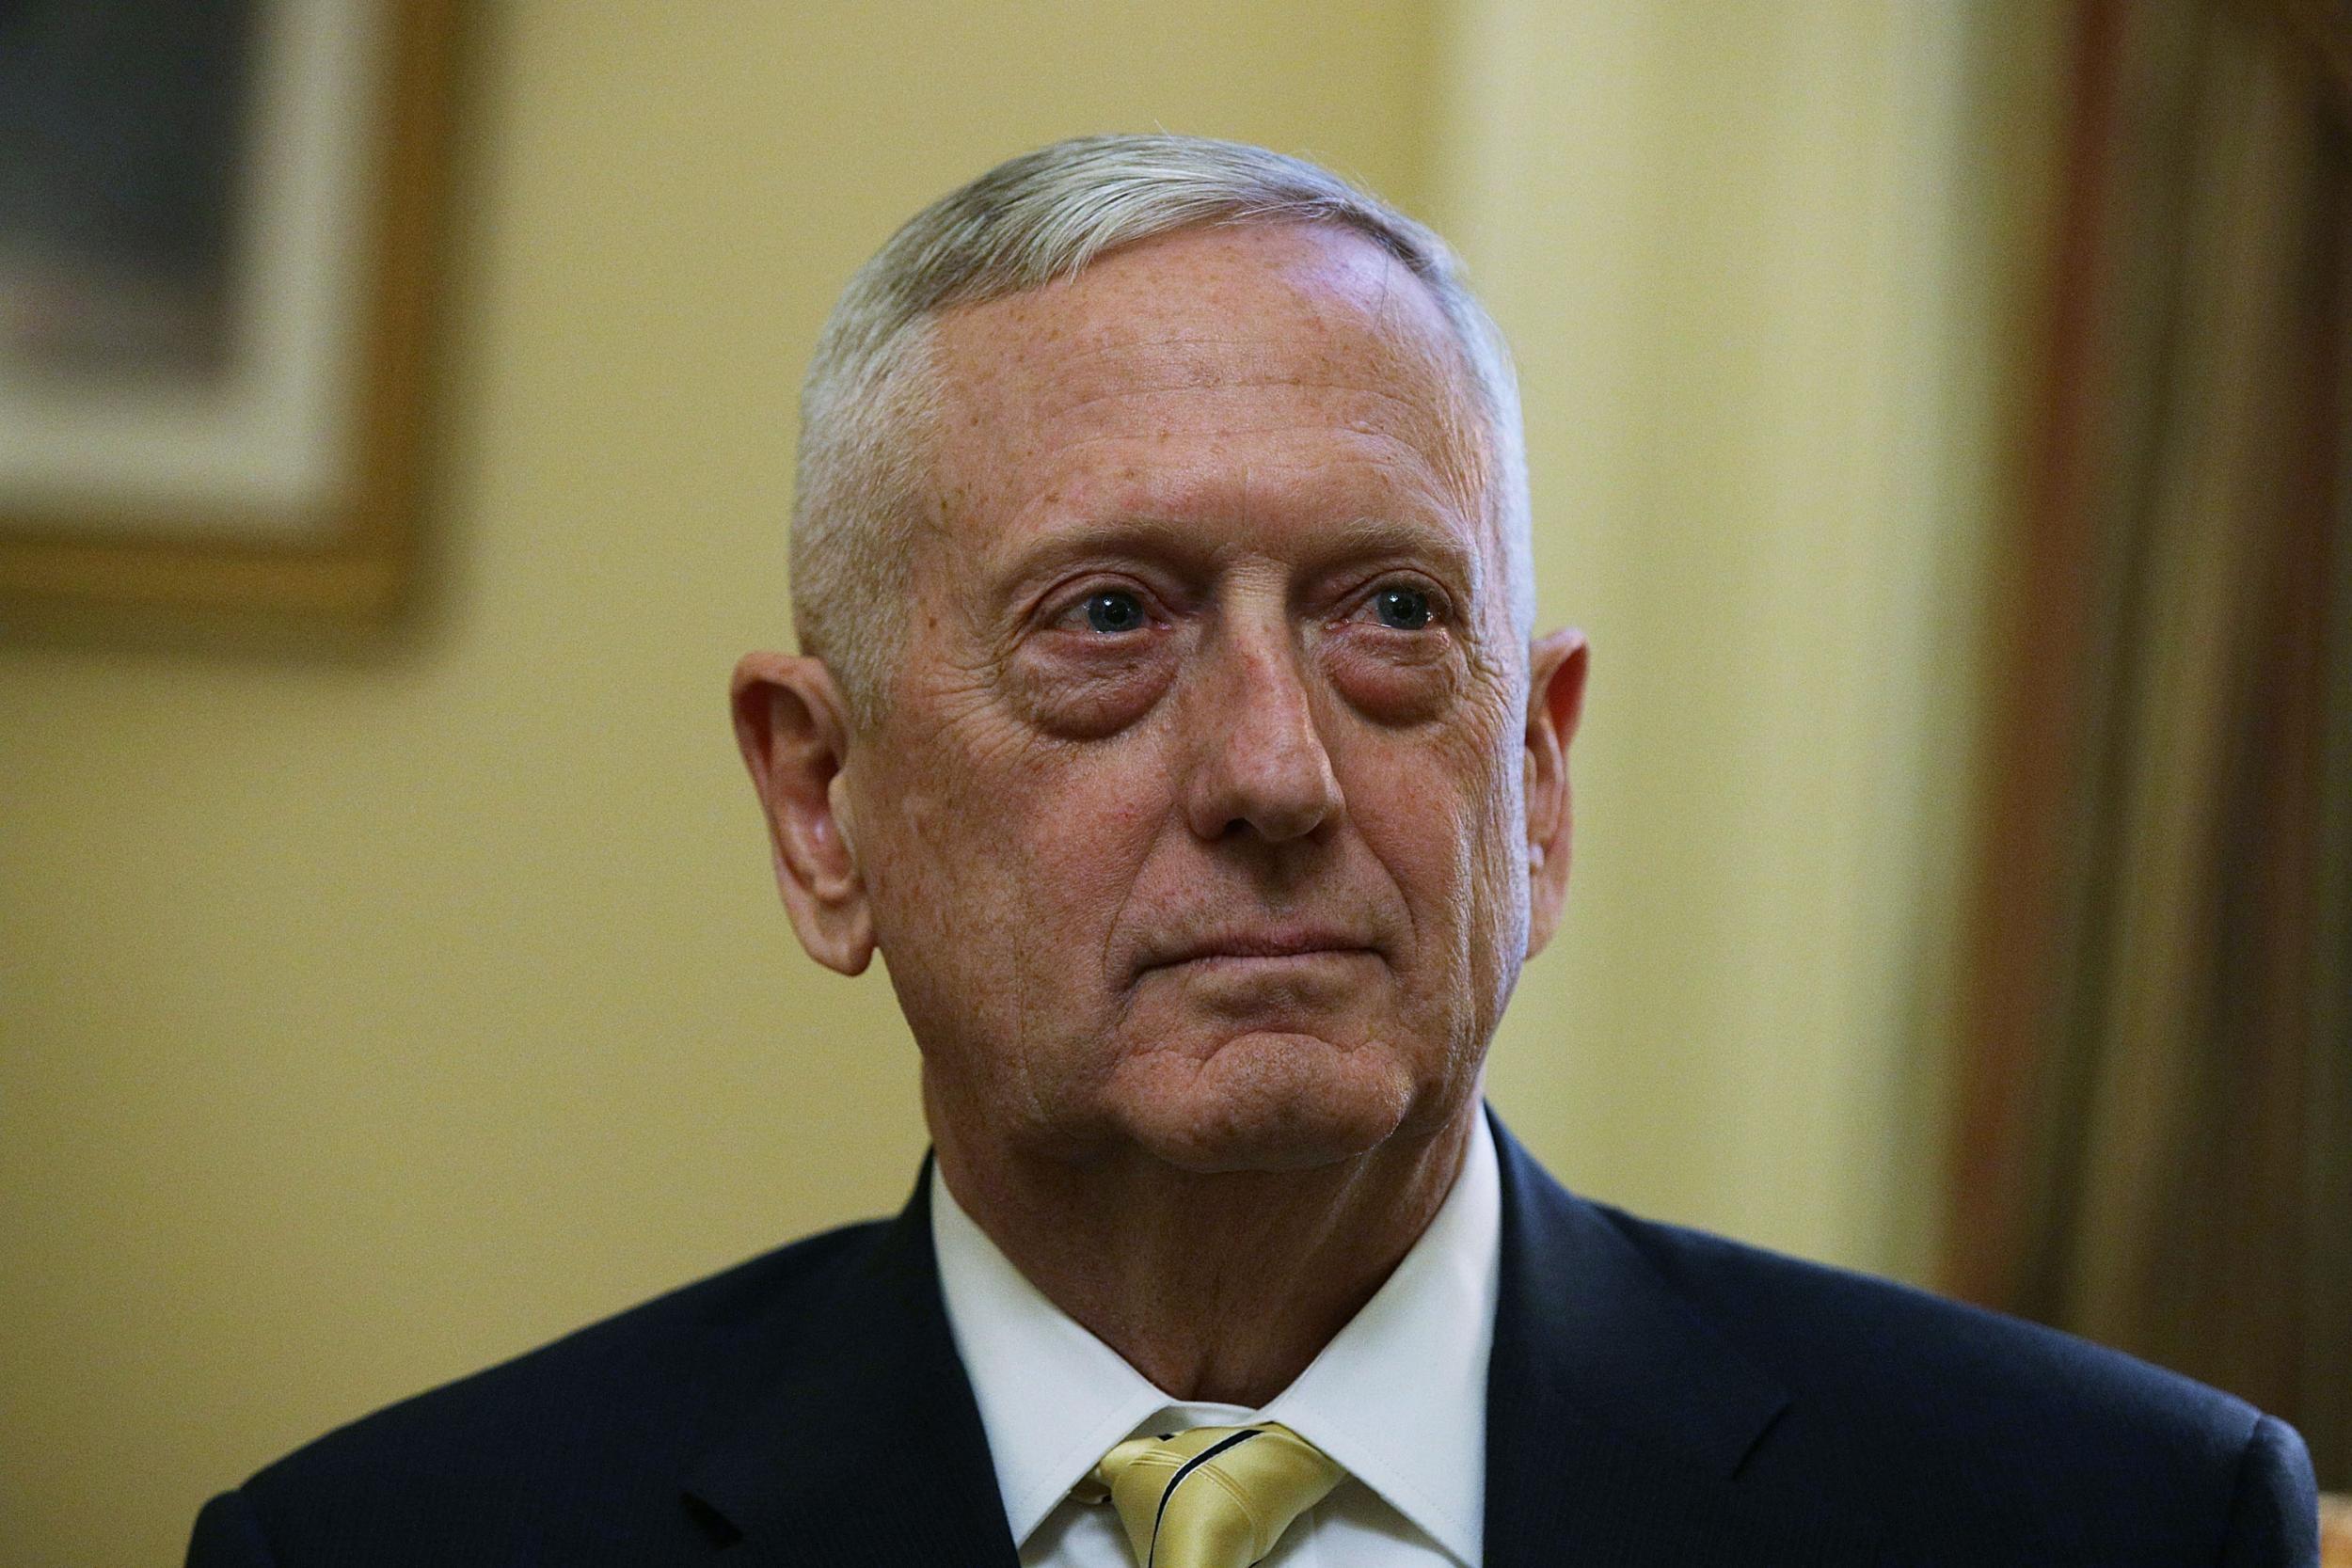 Mattis said he did not think more US troops were 'necessary' in the Middle East, however